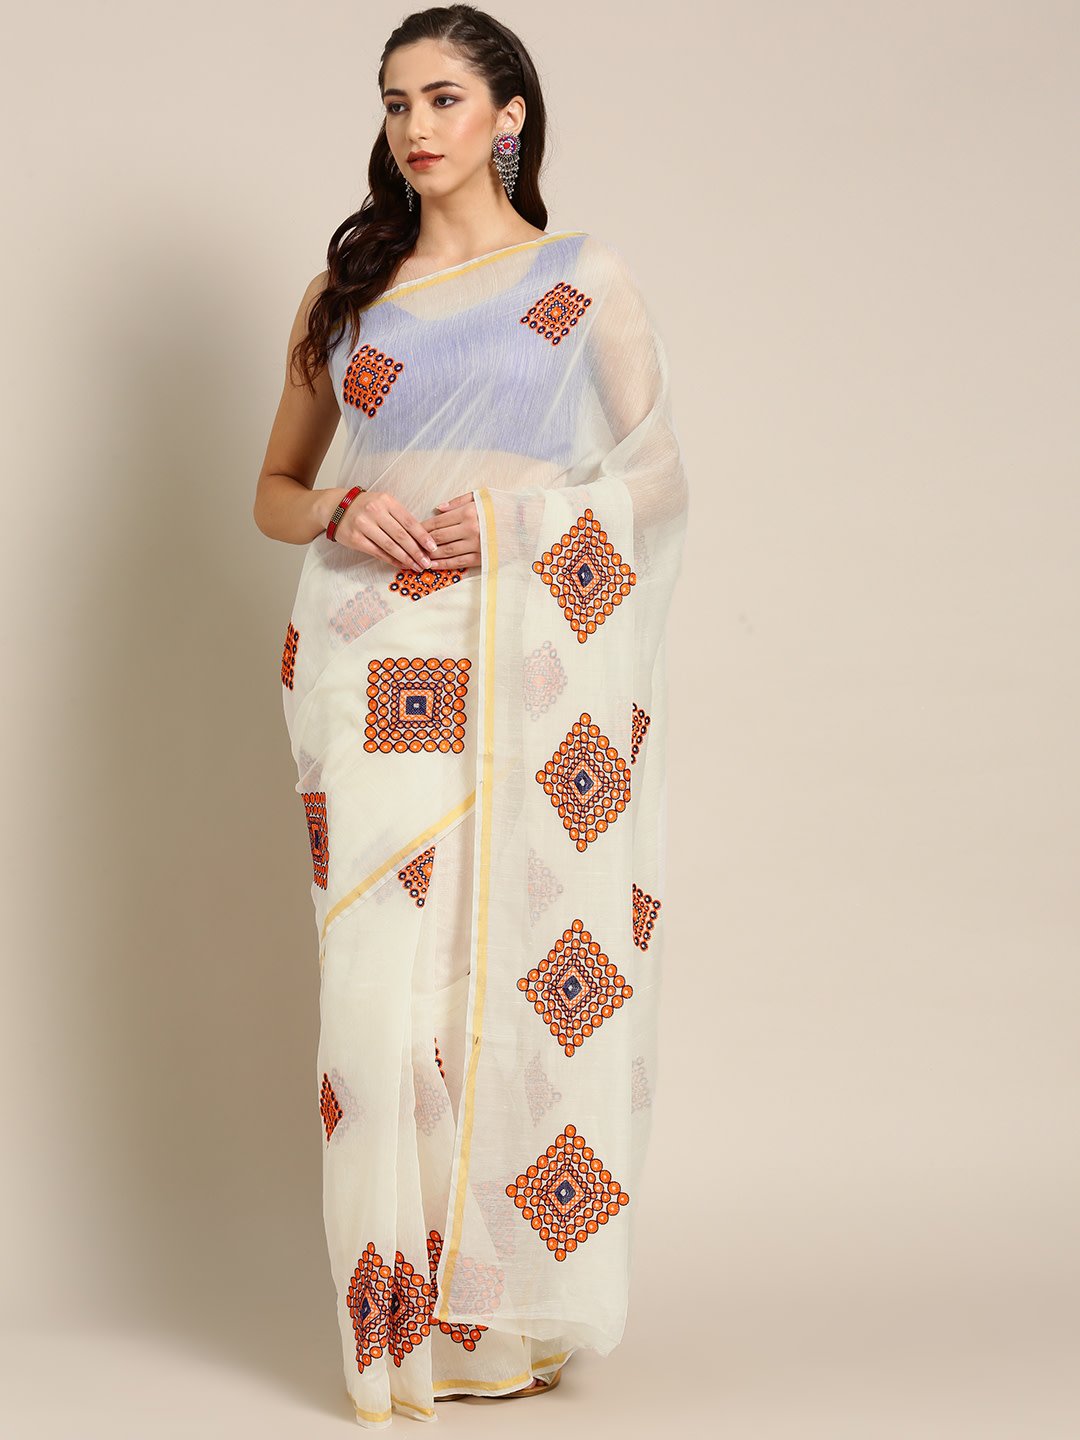 Ishin Poly Cotton Off White Embroidered Women's Saree with Tassels